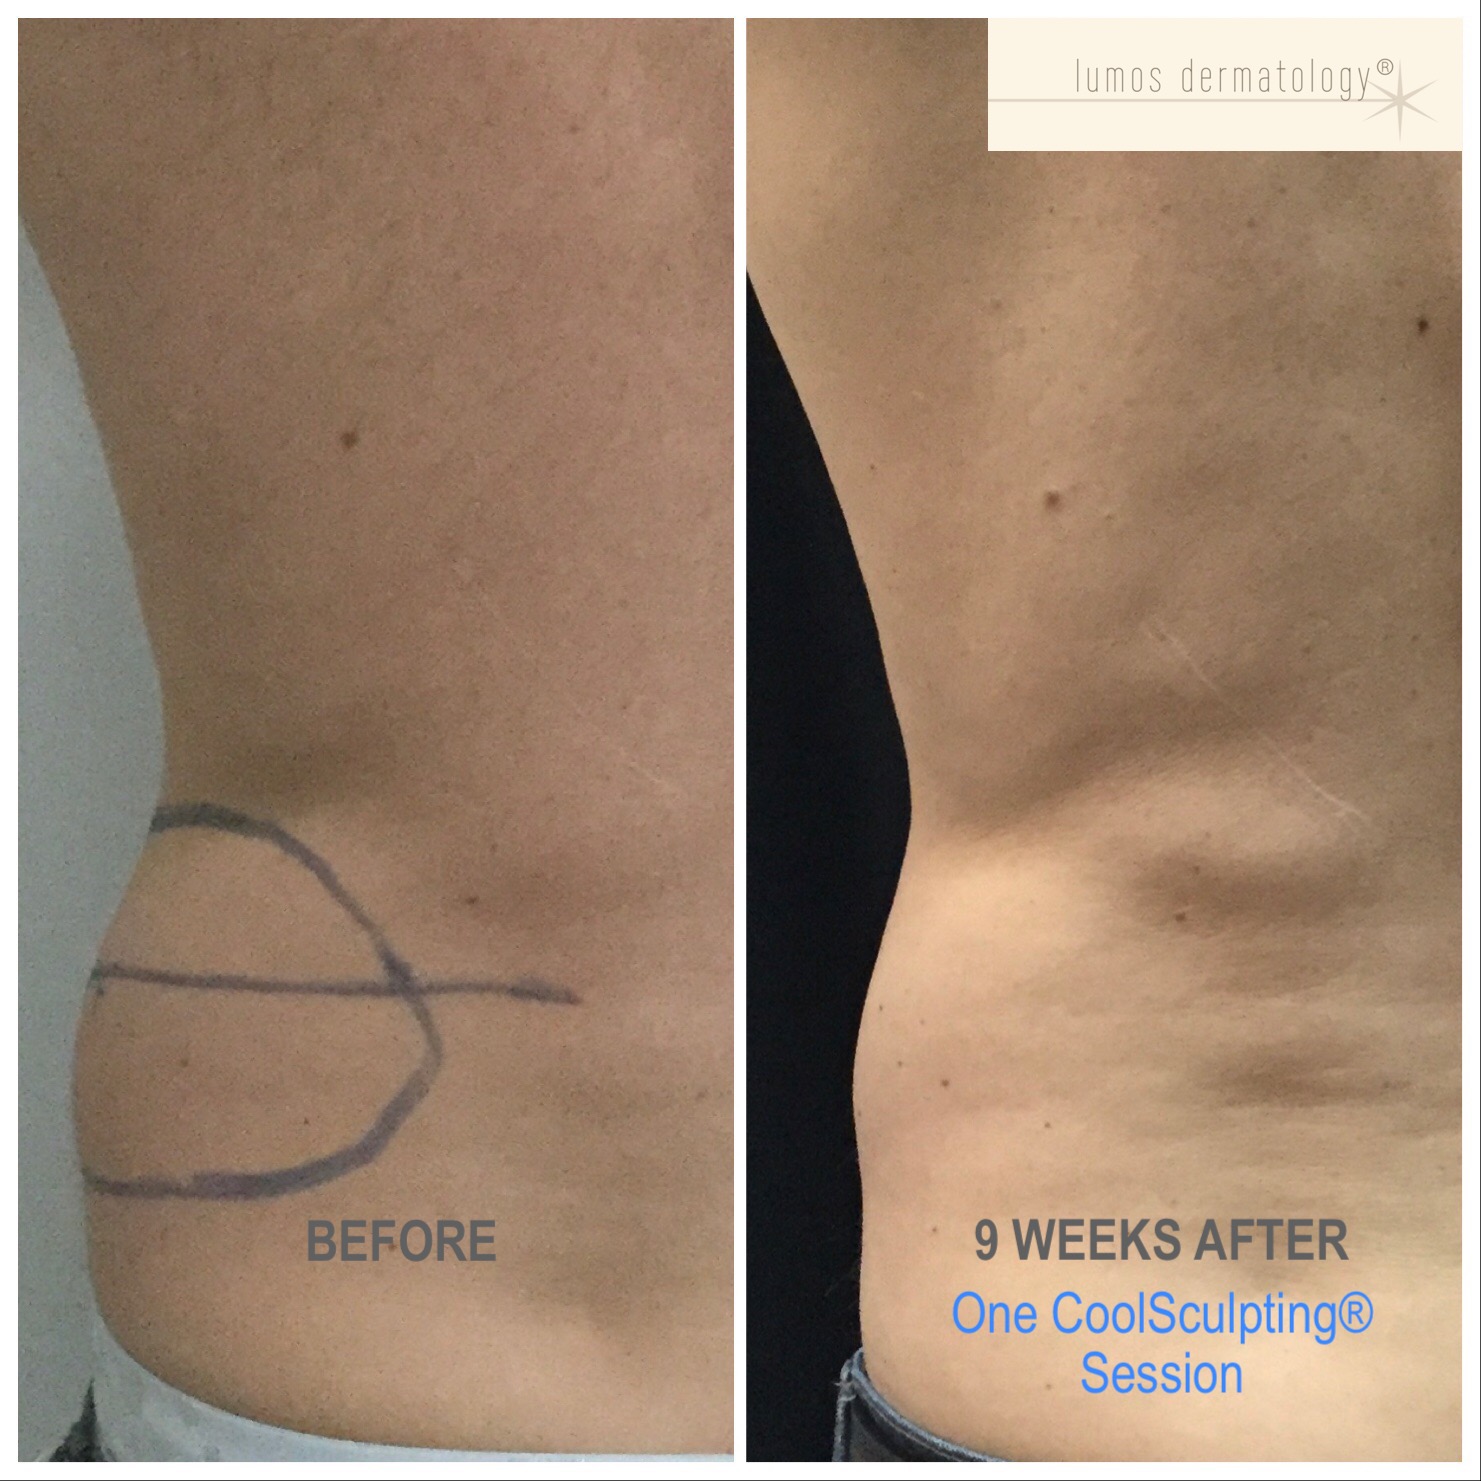 CoolSculpting left posterior flank before and after 1 treatment.JPEG